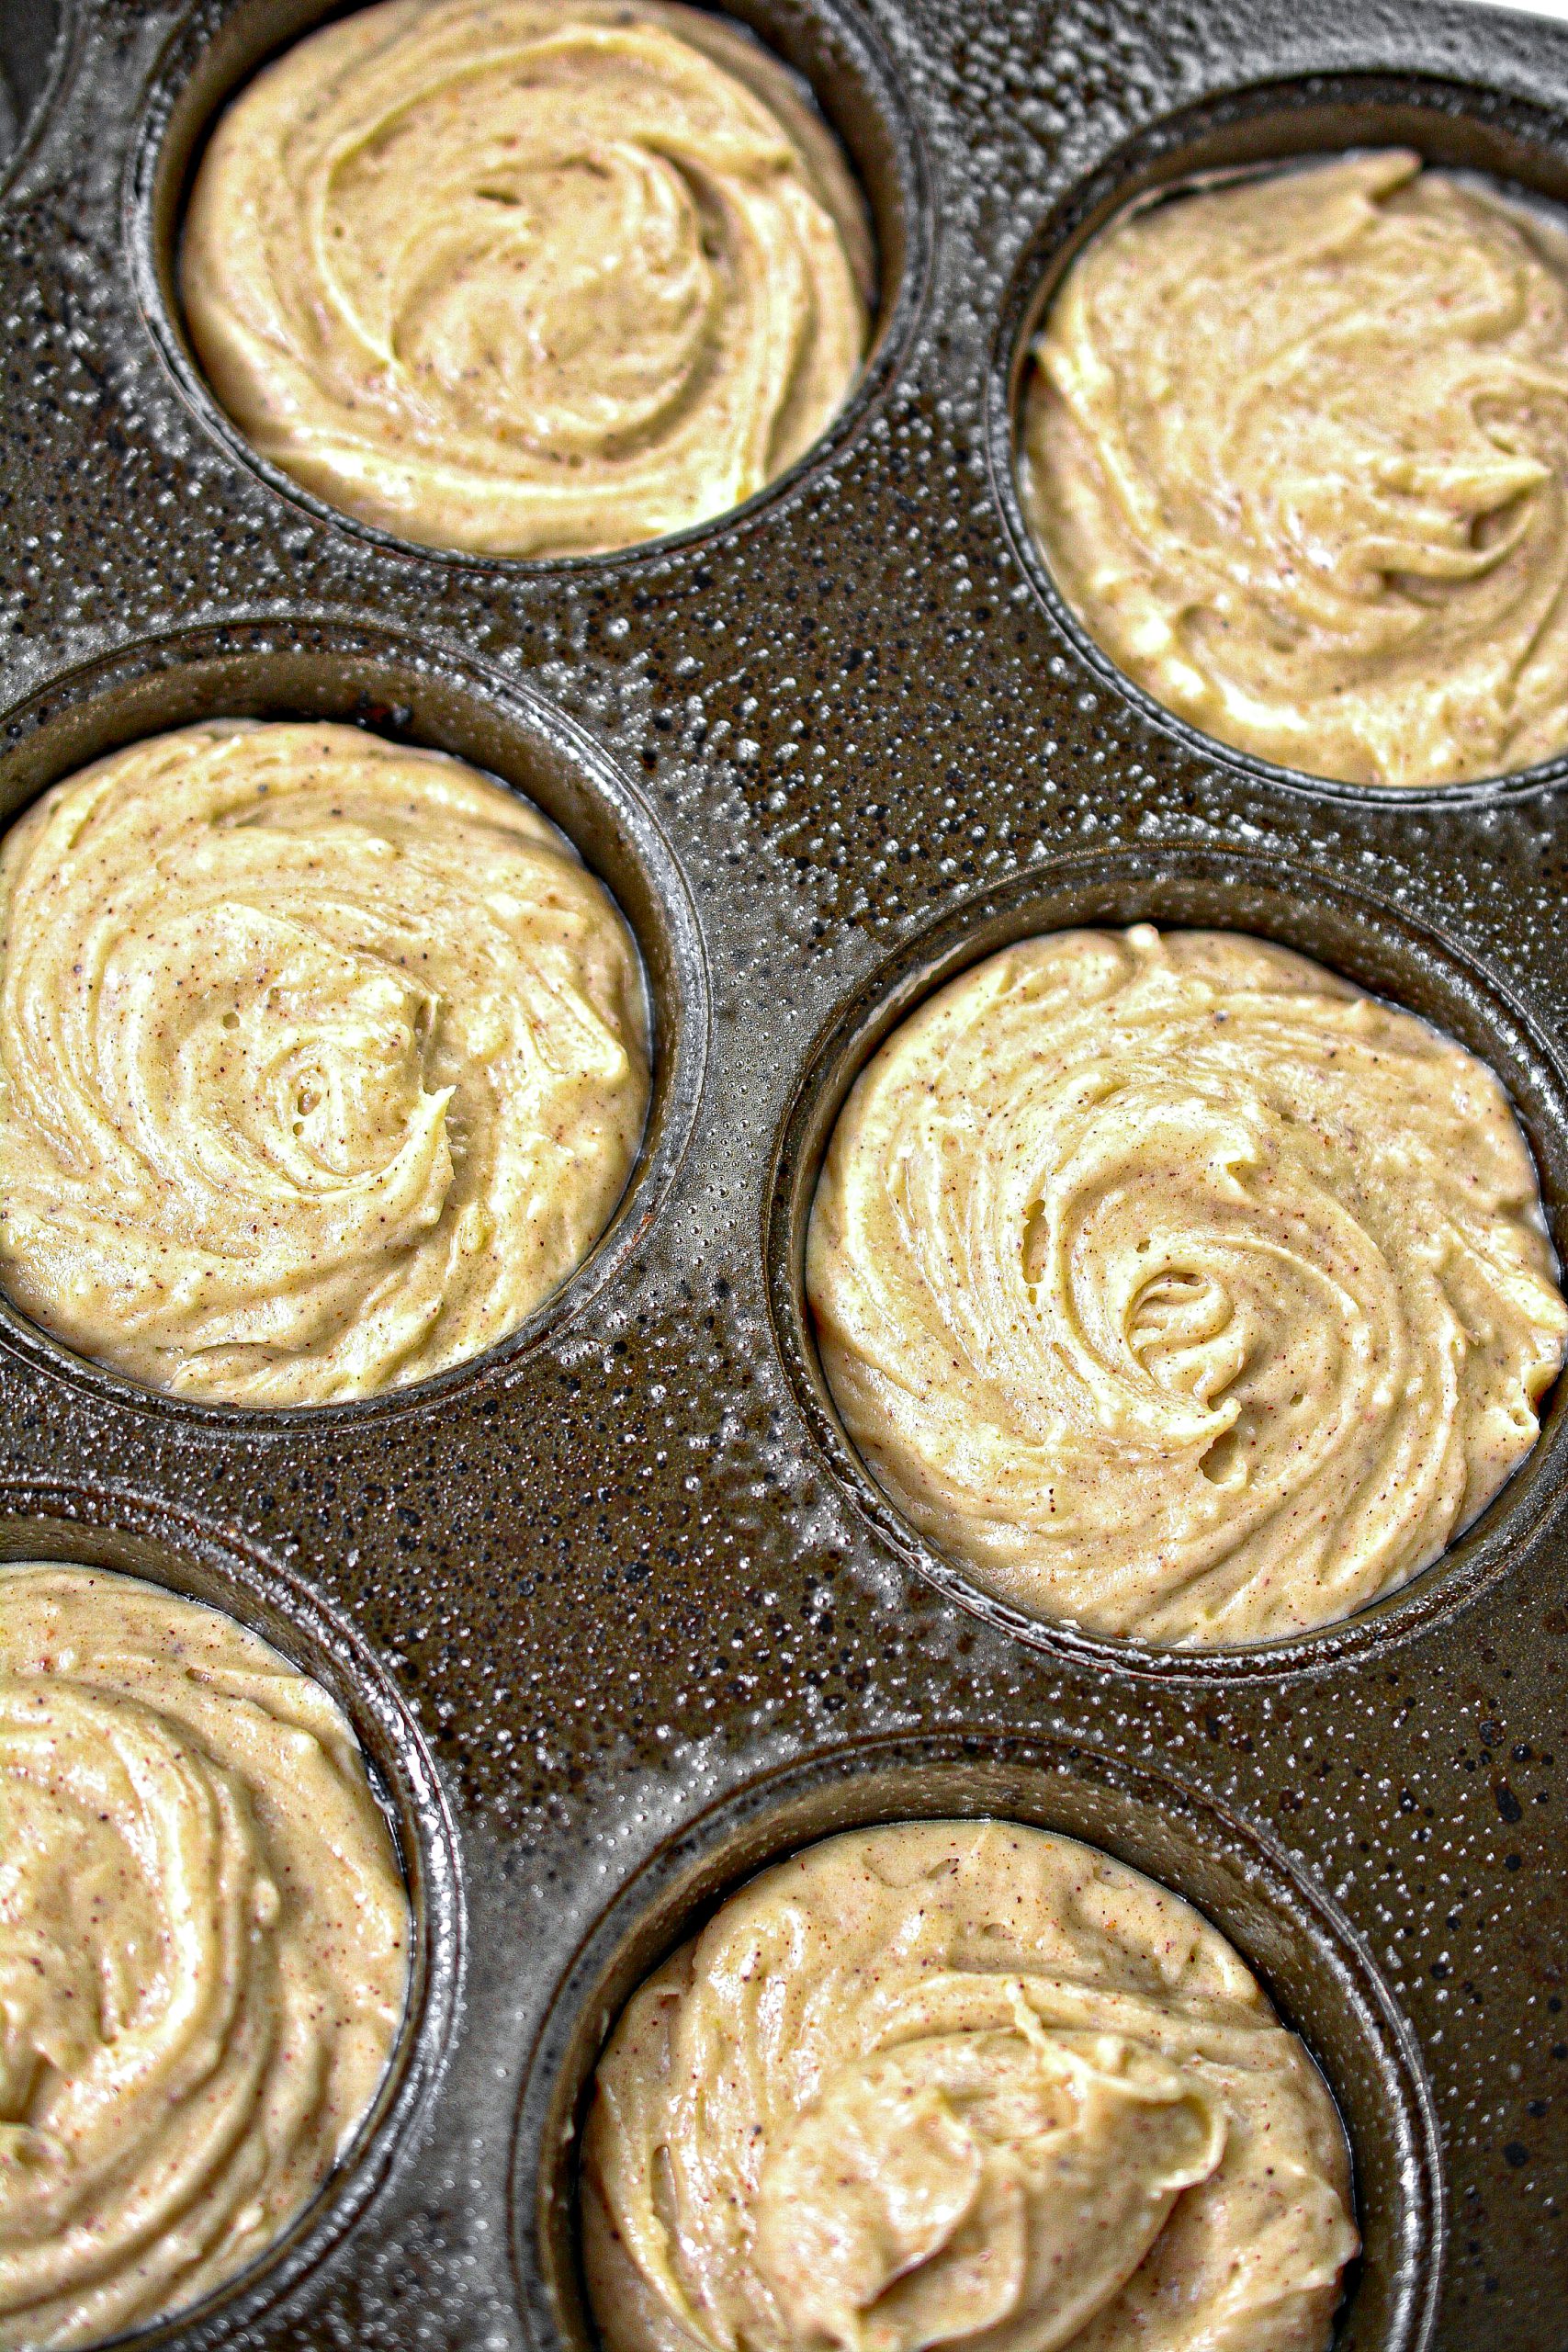 Fill 12 sections of a muffin tin evenly with the batter, and bake for 15-20 minutes until browned and cooked through.